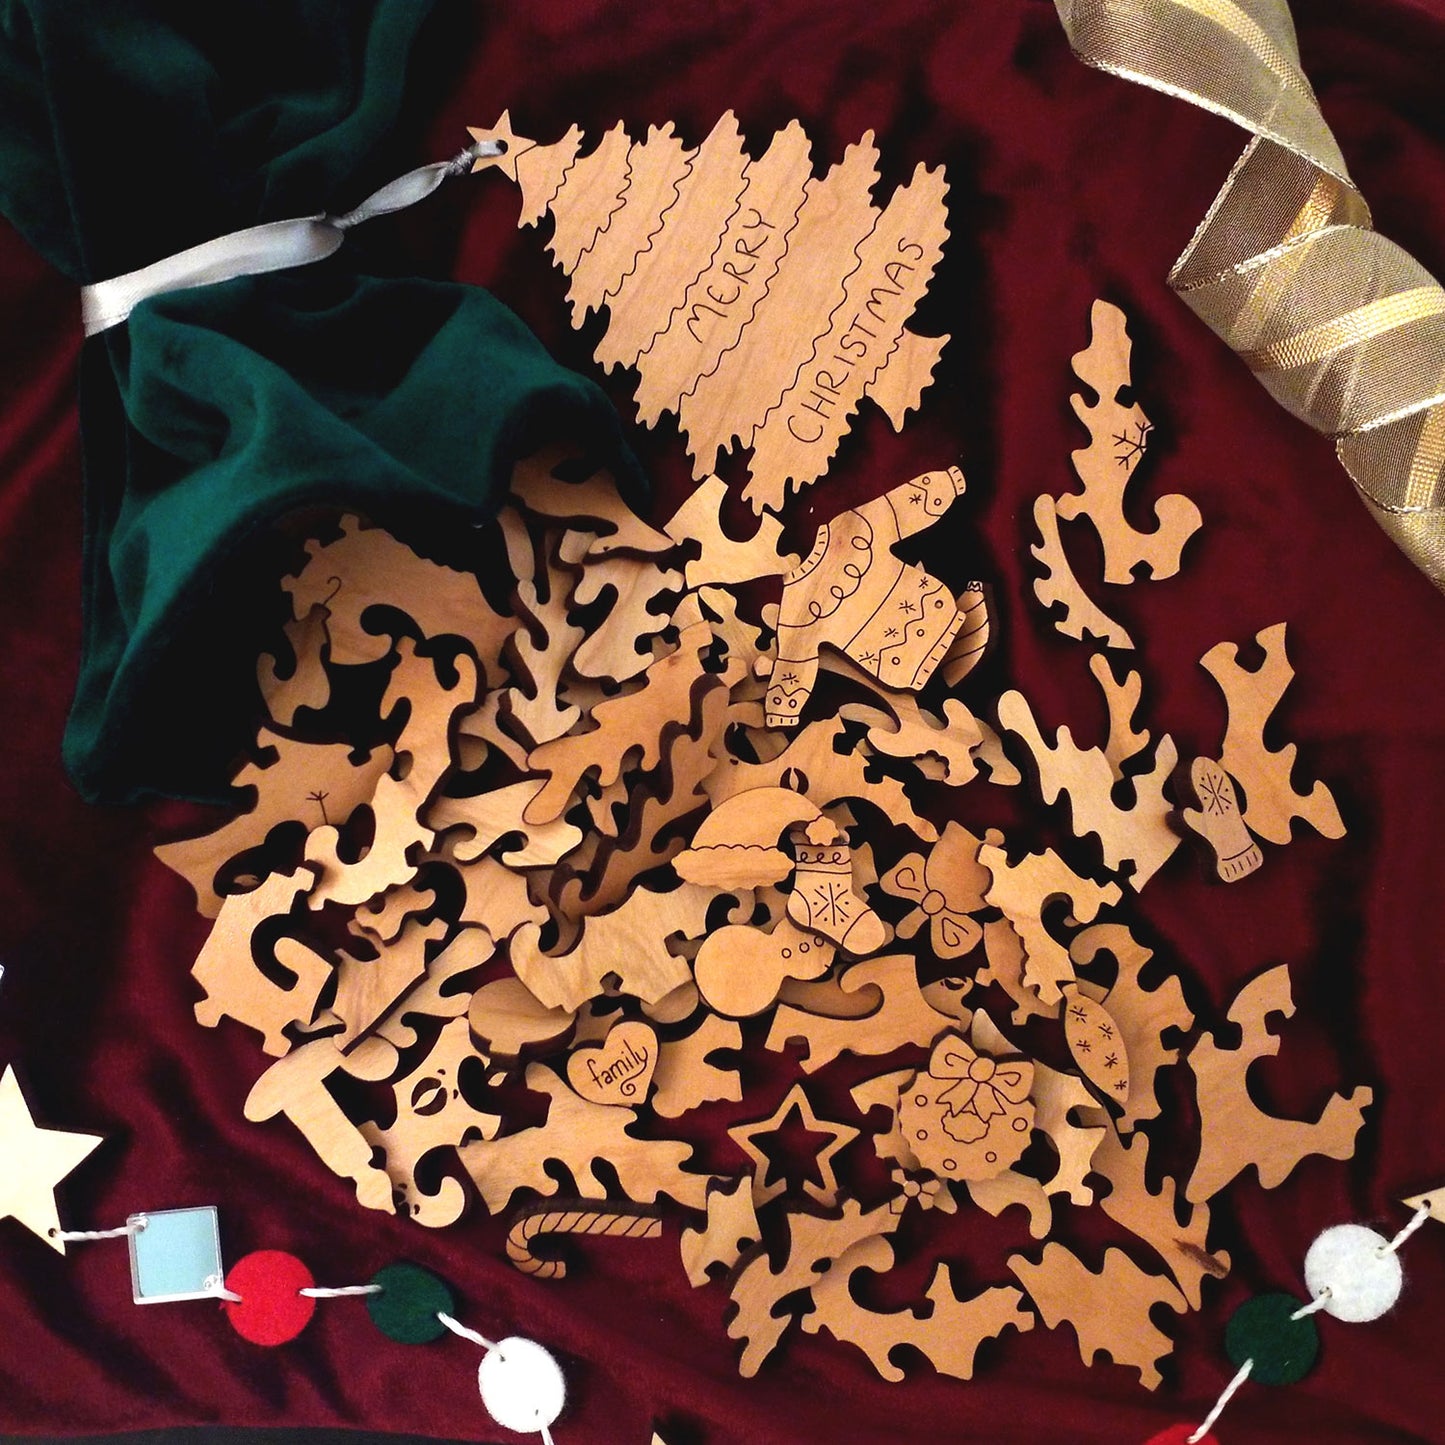 Customizable Christmas Tree Puzzle with Whimsies And Matching Gift Tag